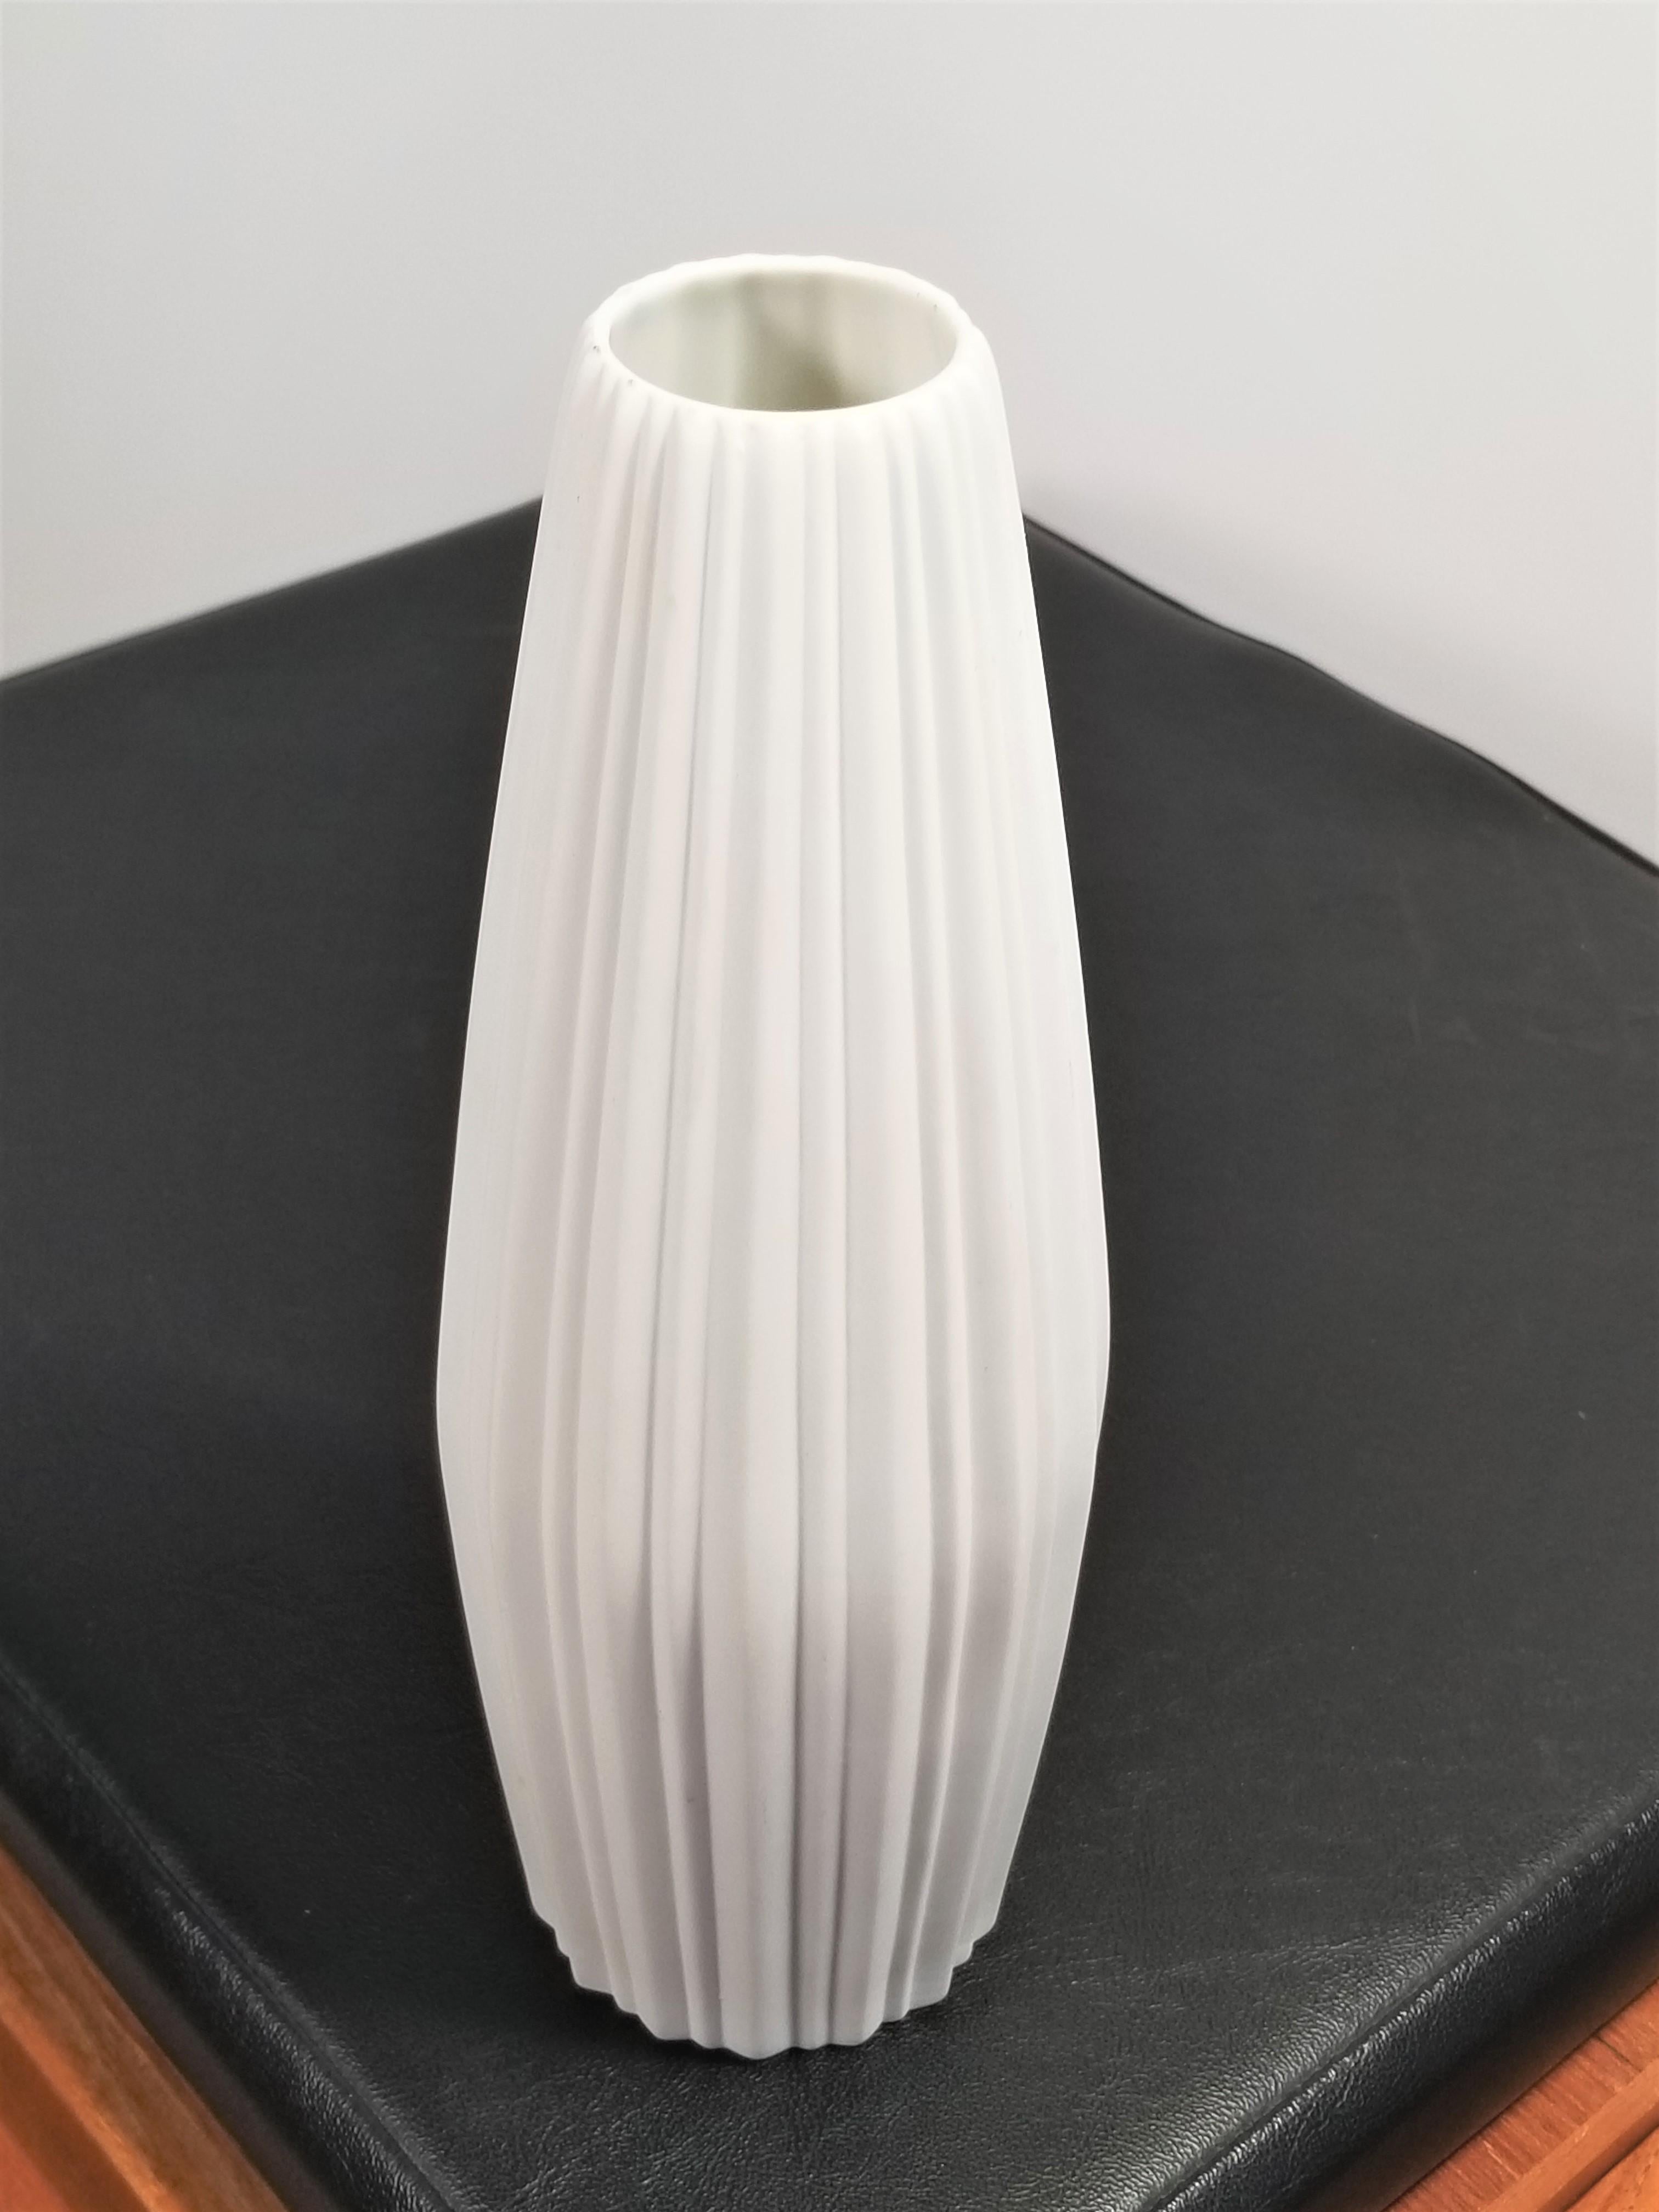 Heinrich  West Germany  Selb 1960's Dull Biscuit Porcelain Precious White Vase